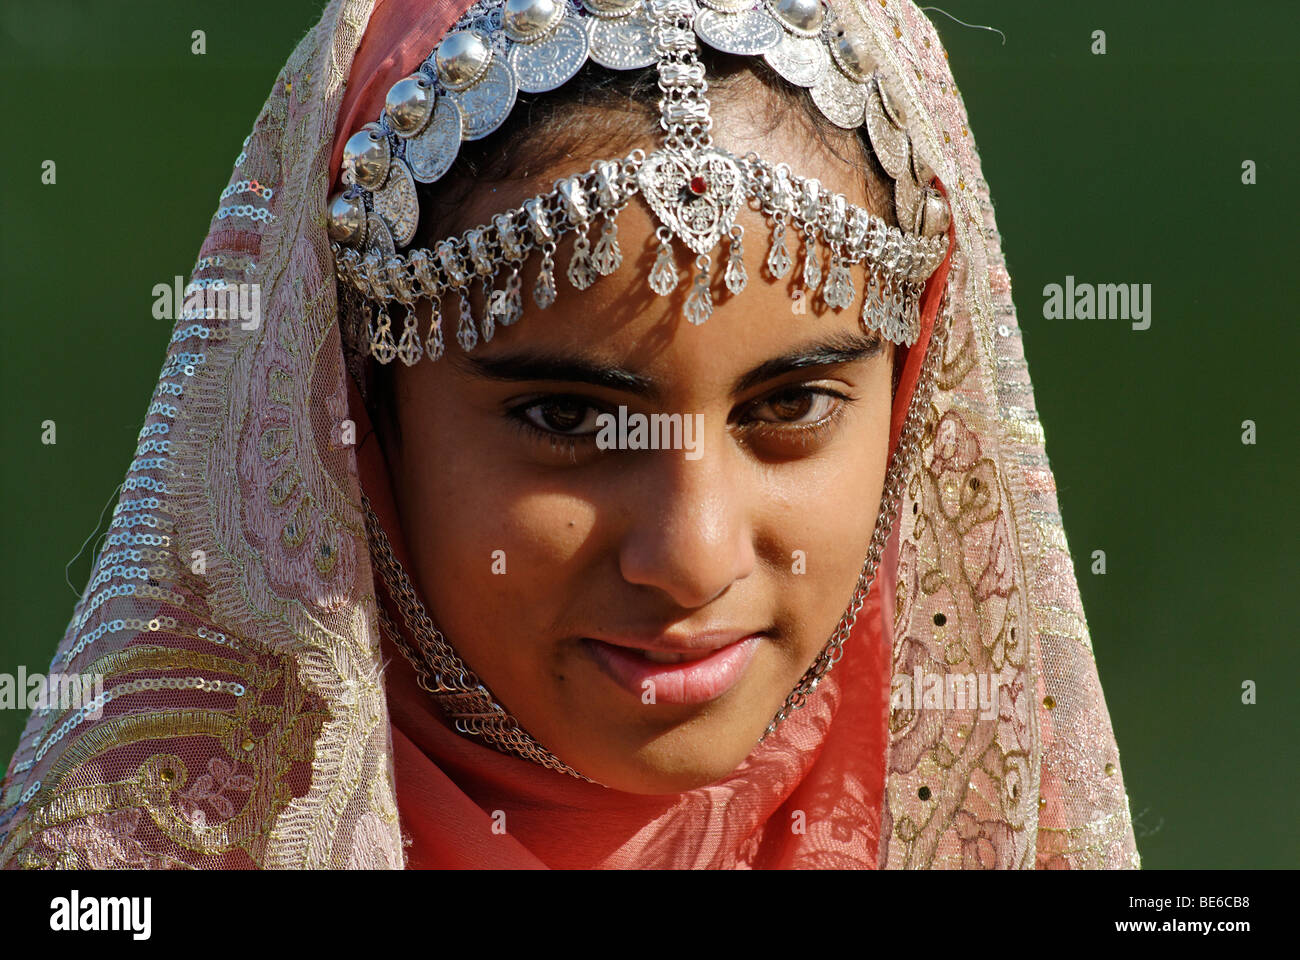 Omani girl in traditional dress with jewelry, Nakhl, Batinah Region, Sultanate of Oman, Arabia, Middle East Stock Photo